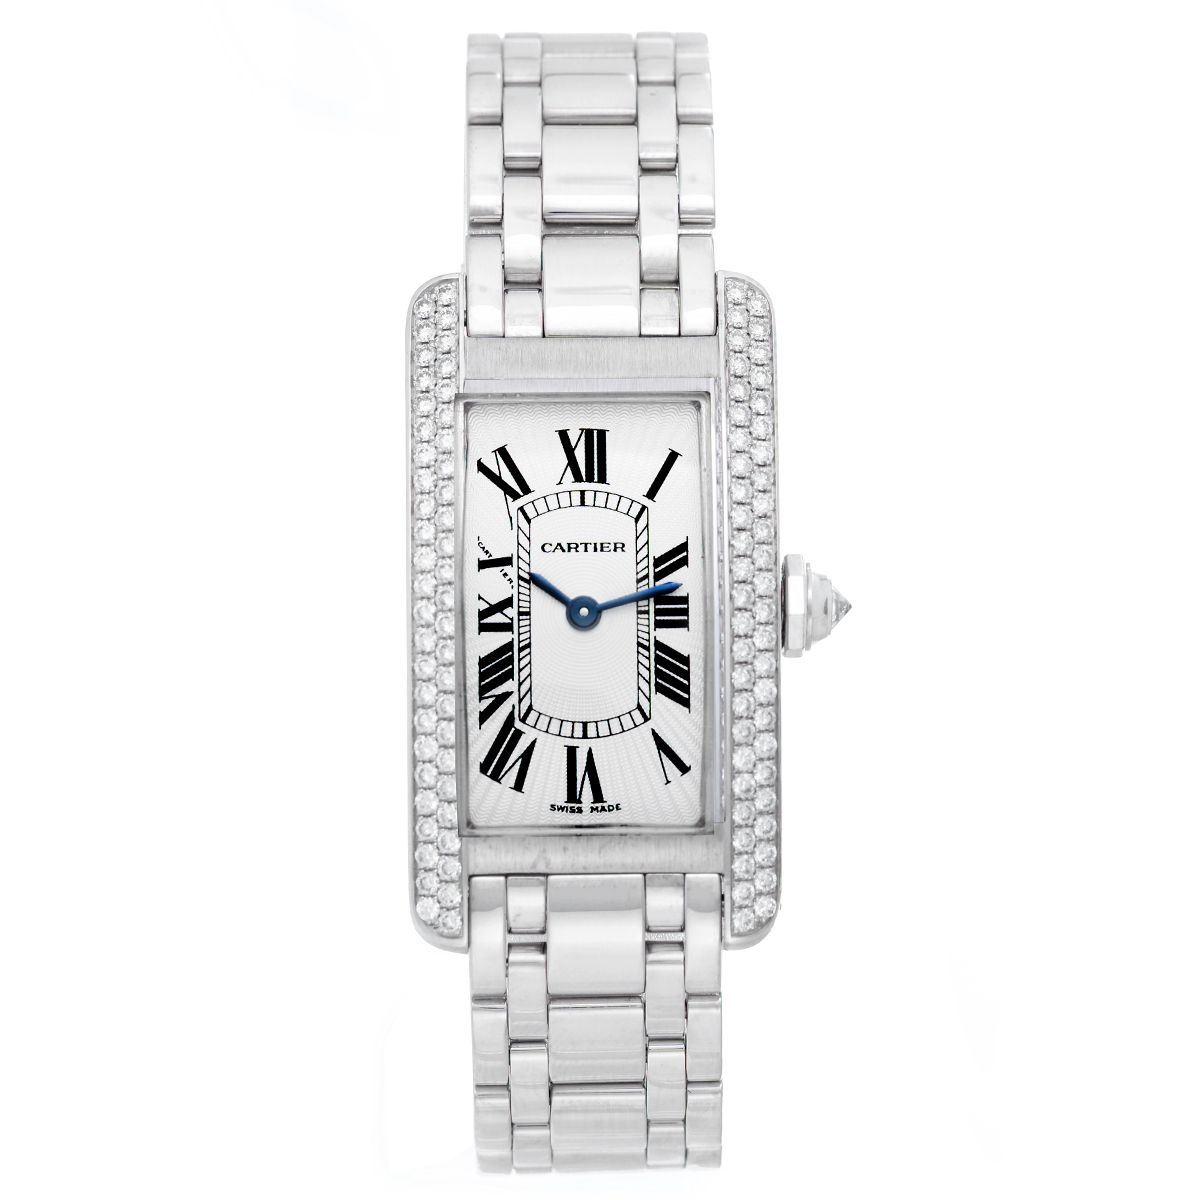 Cartier Tank Americaine (or American 